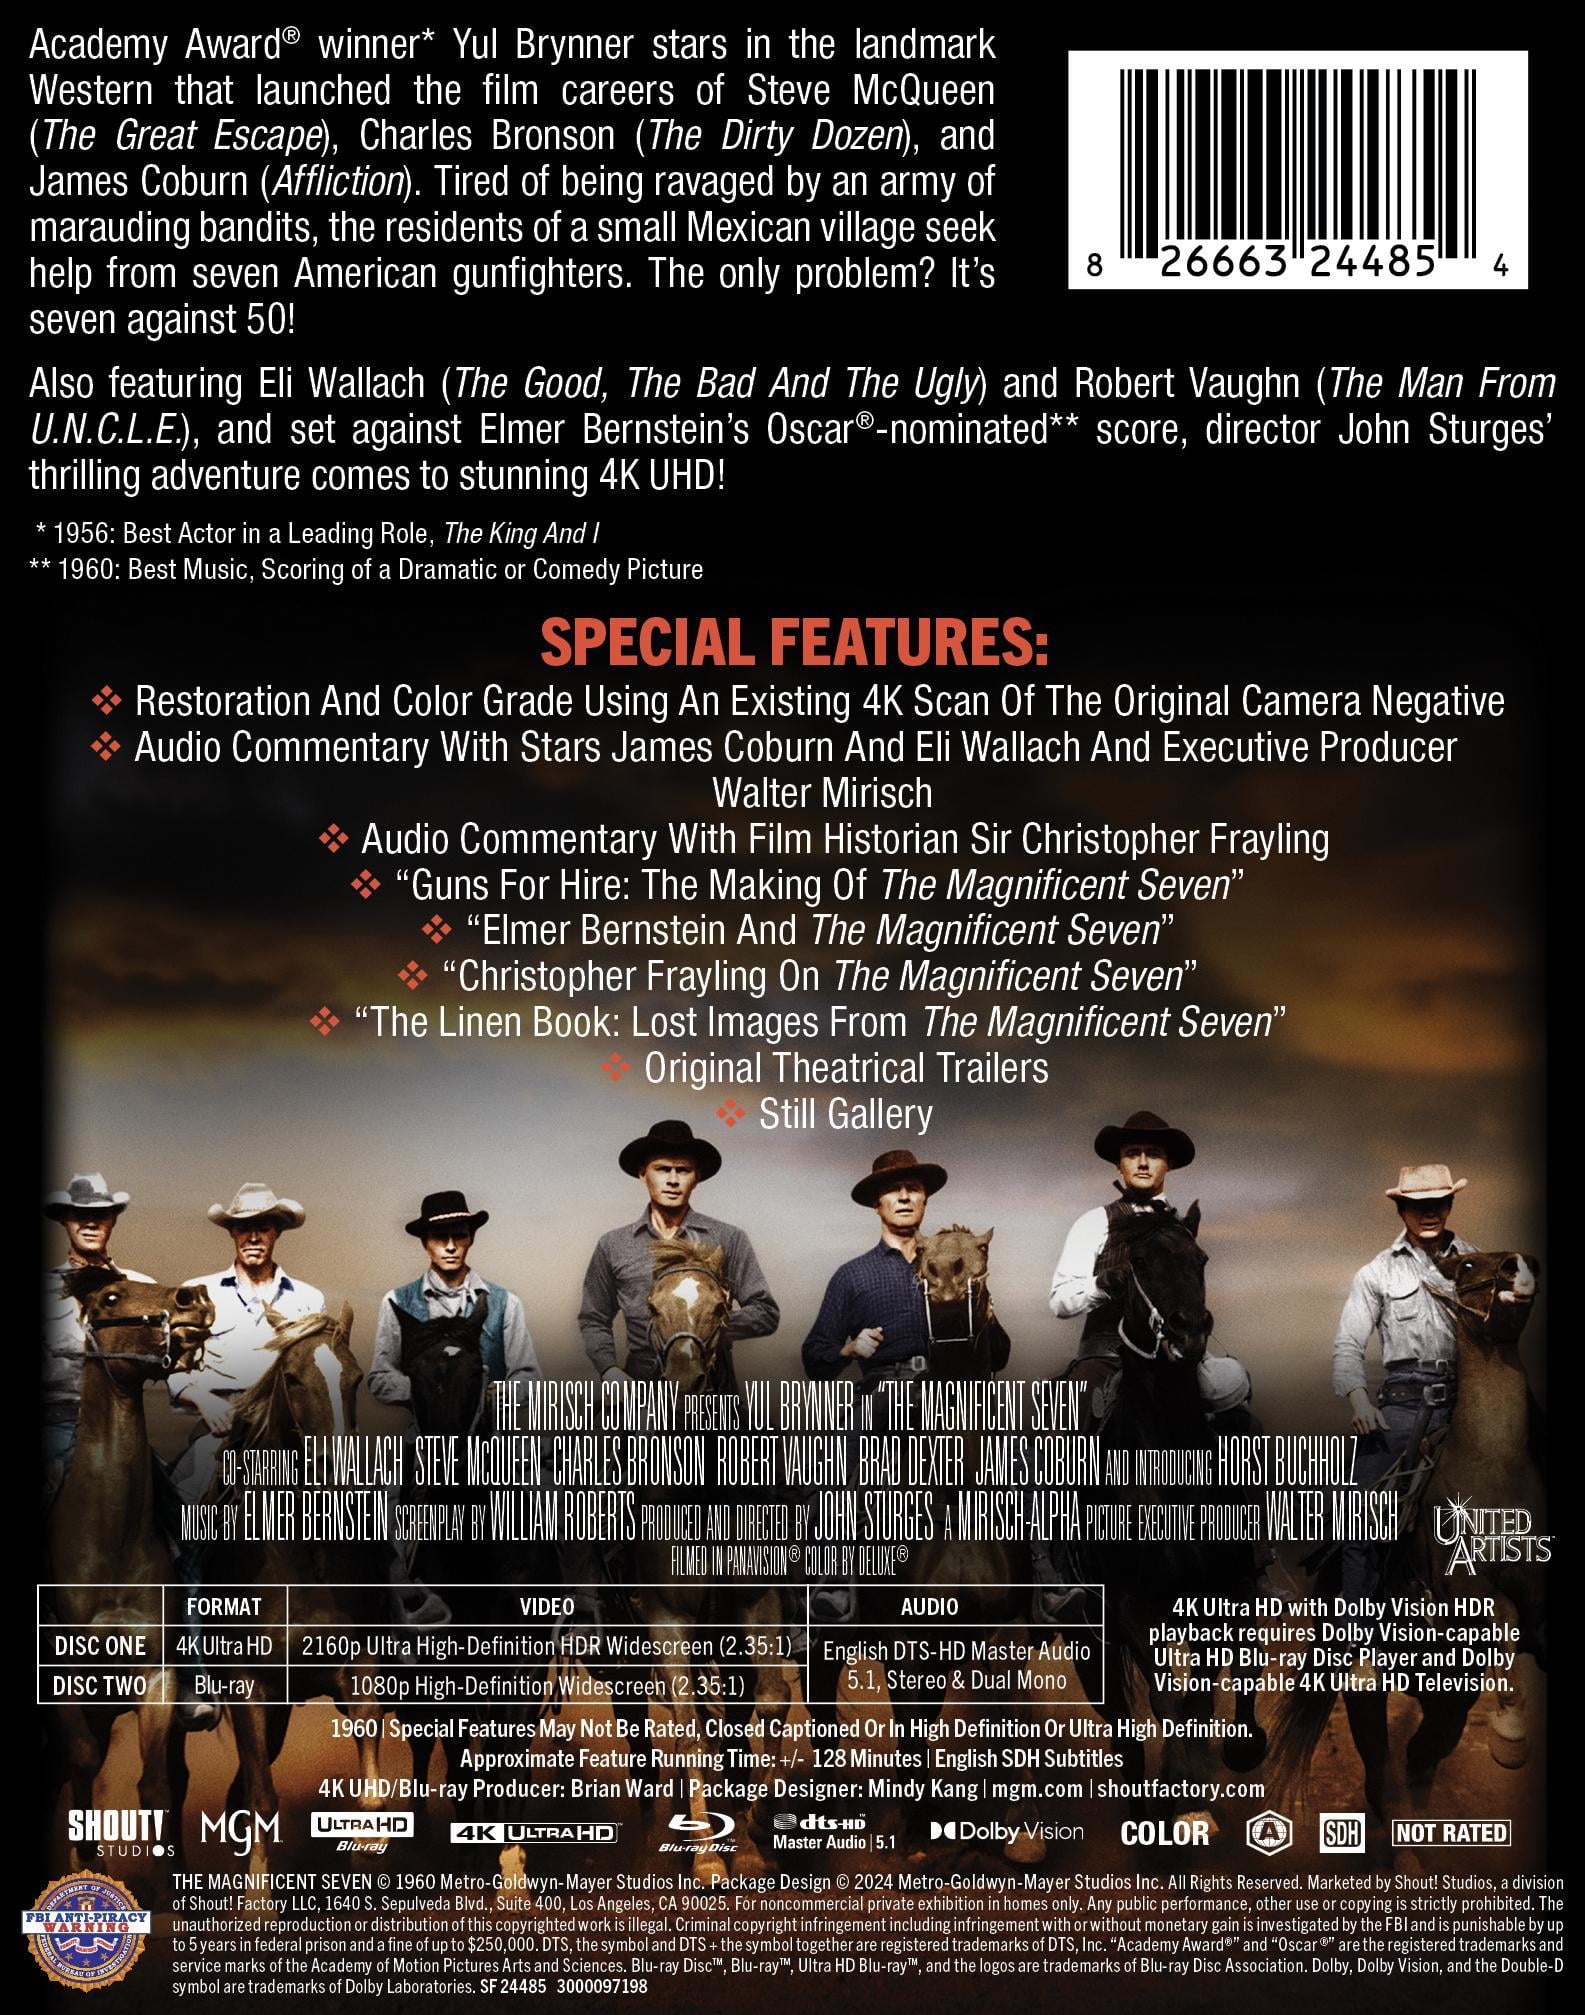 The Magnificent Seven (1960) - 4K Ultra HD Review